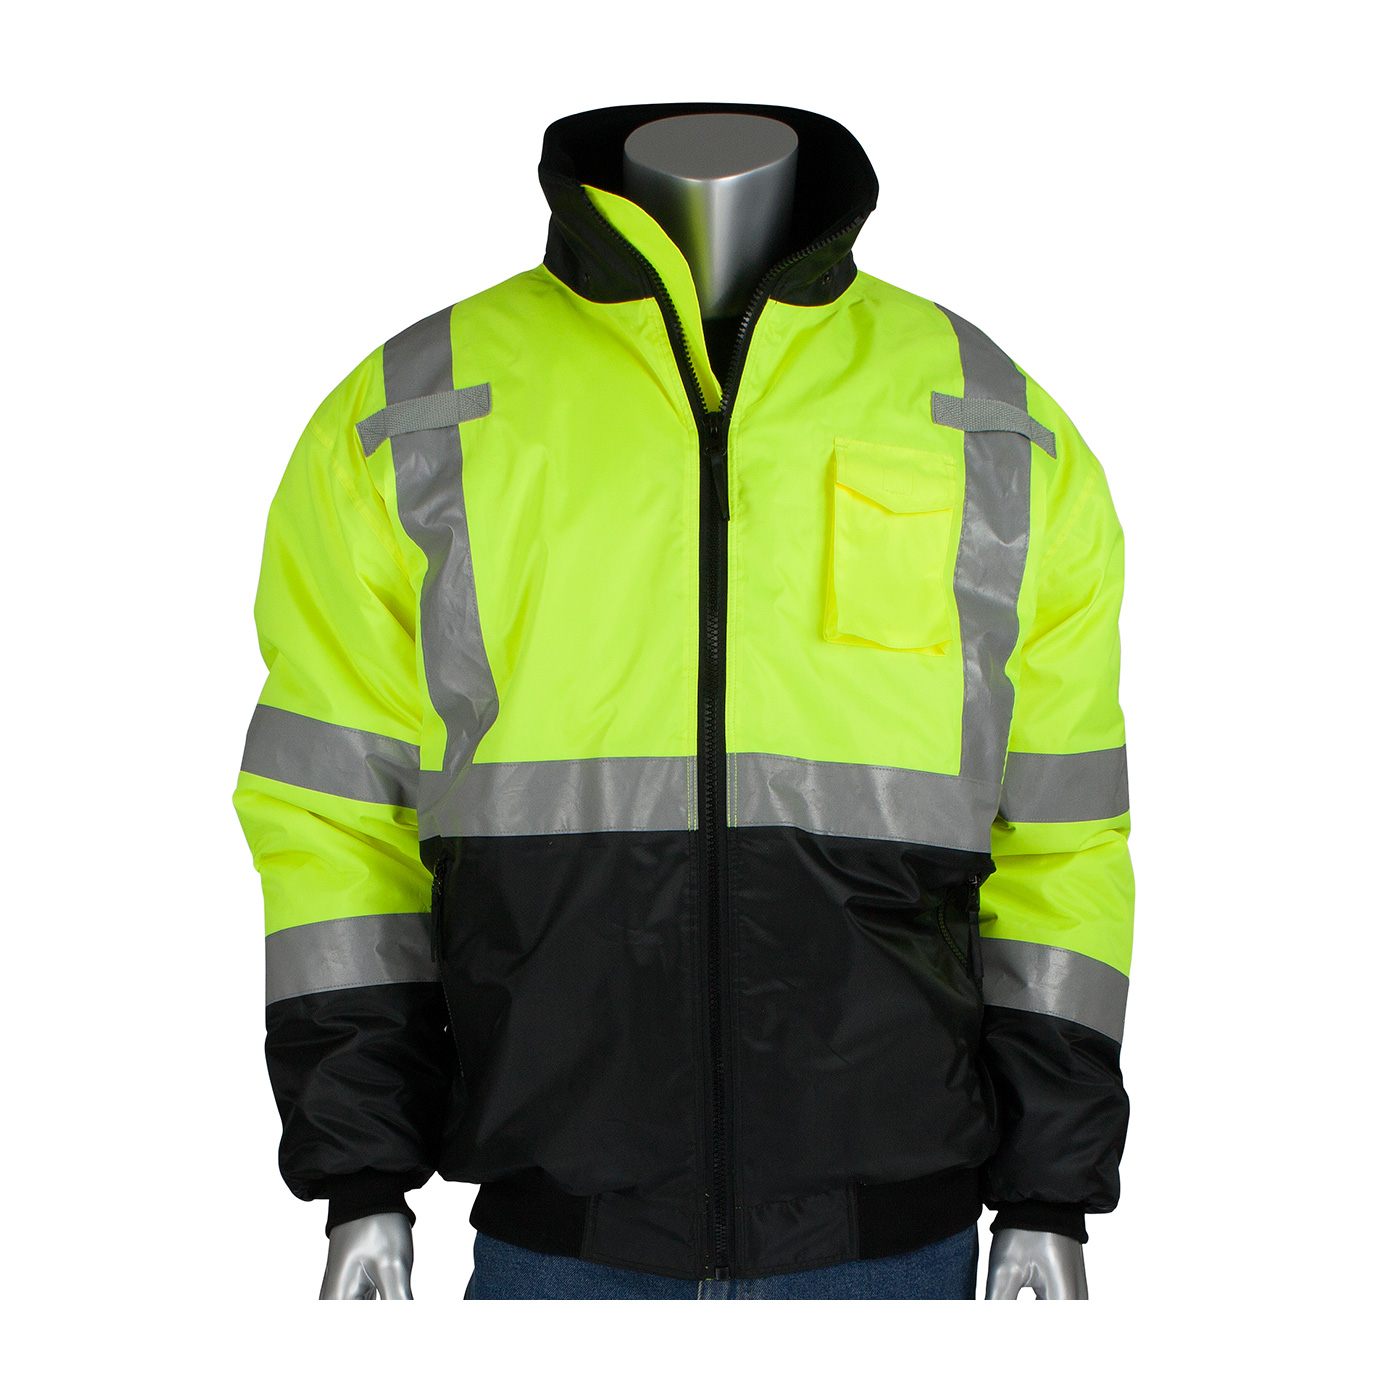 PIP ANSI Class R3 Bomber Jacket - Featured Products